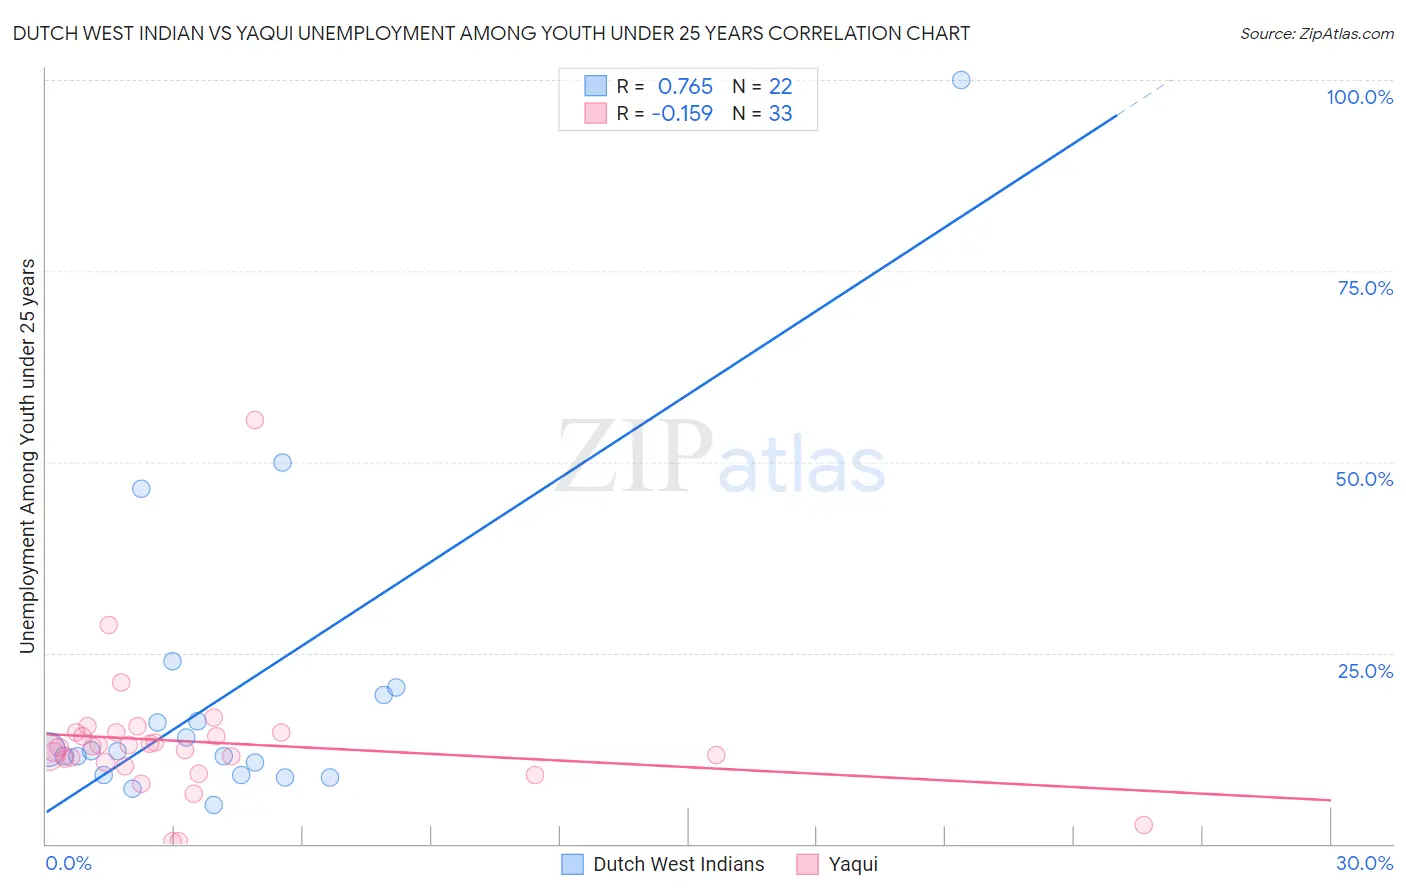 Dutch West Indian vs Yaqui Unemployment Among Youth under 25 years